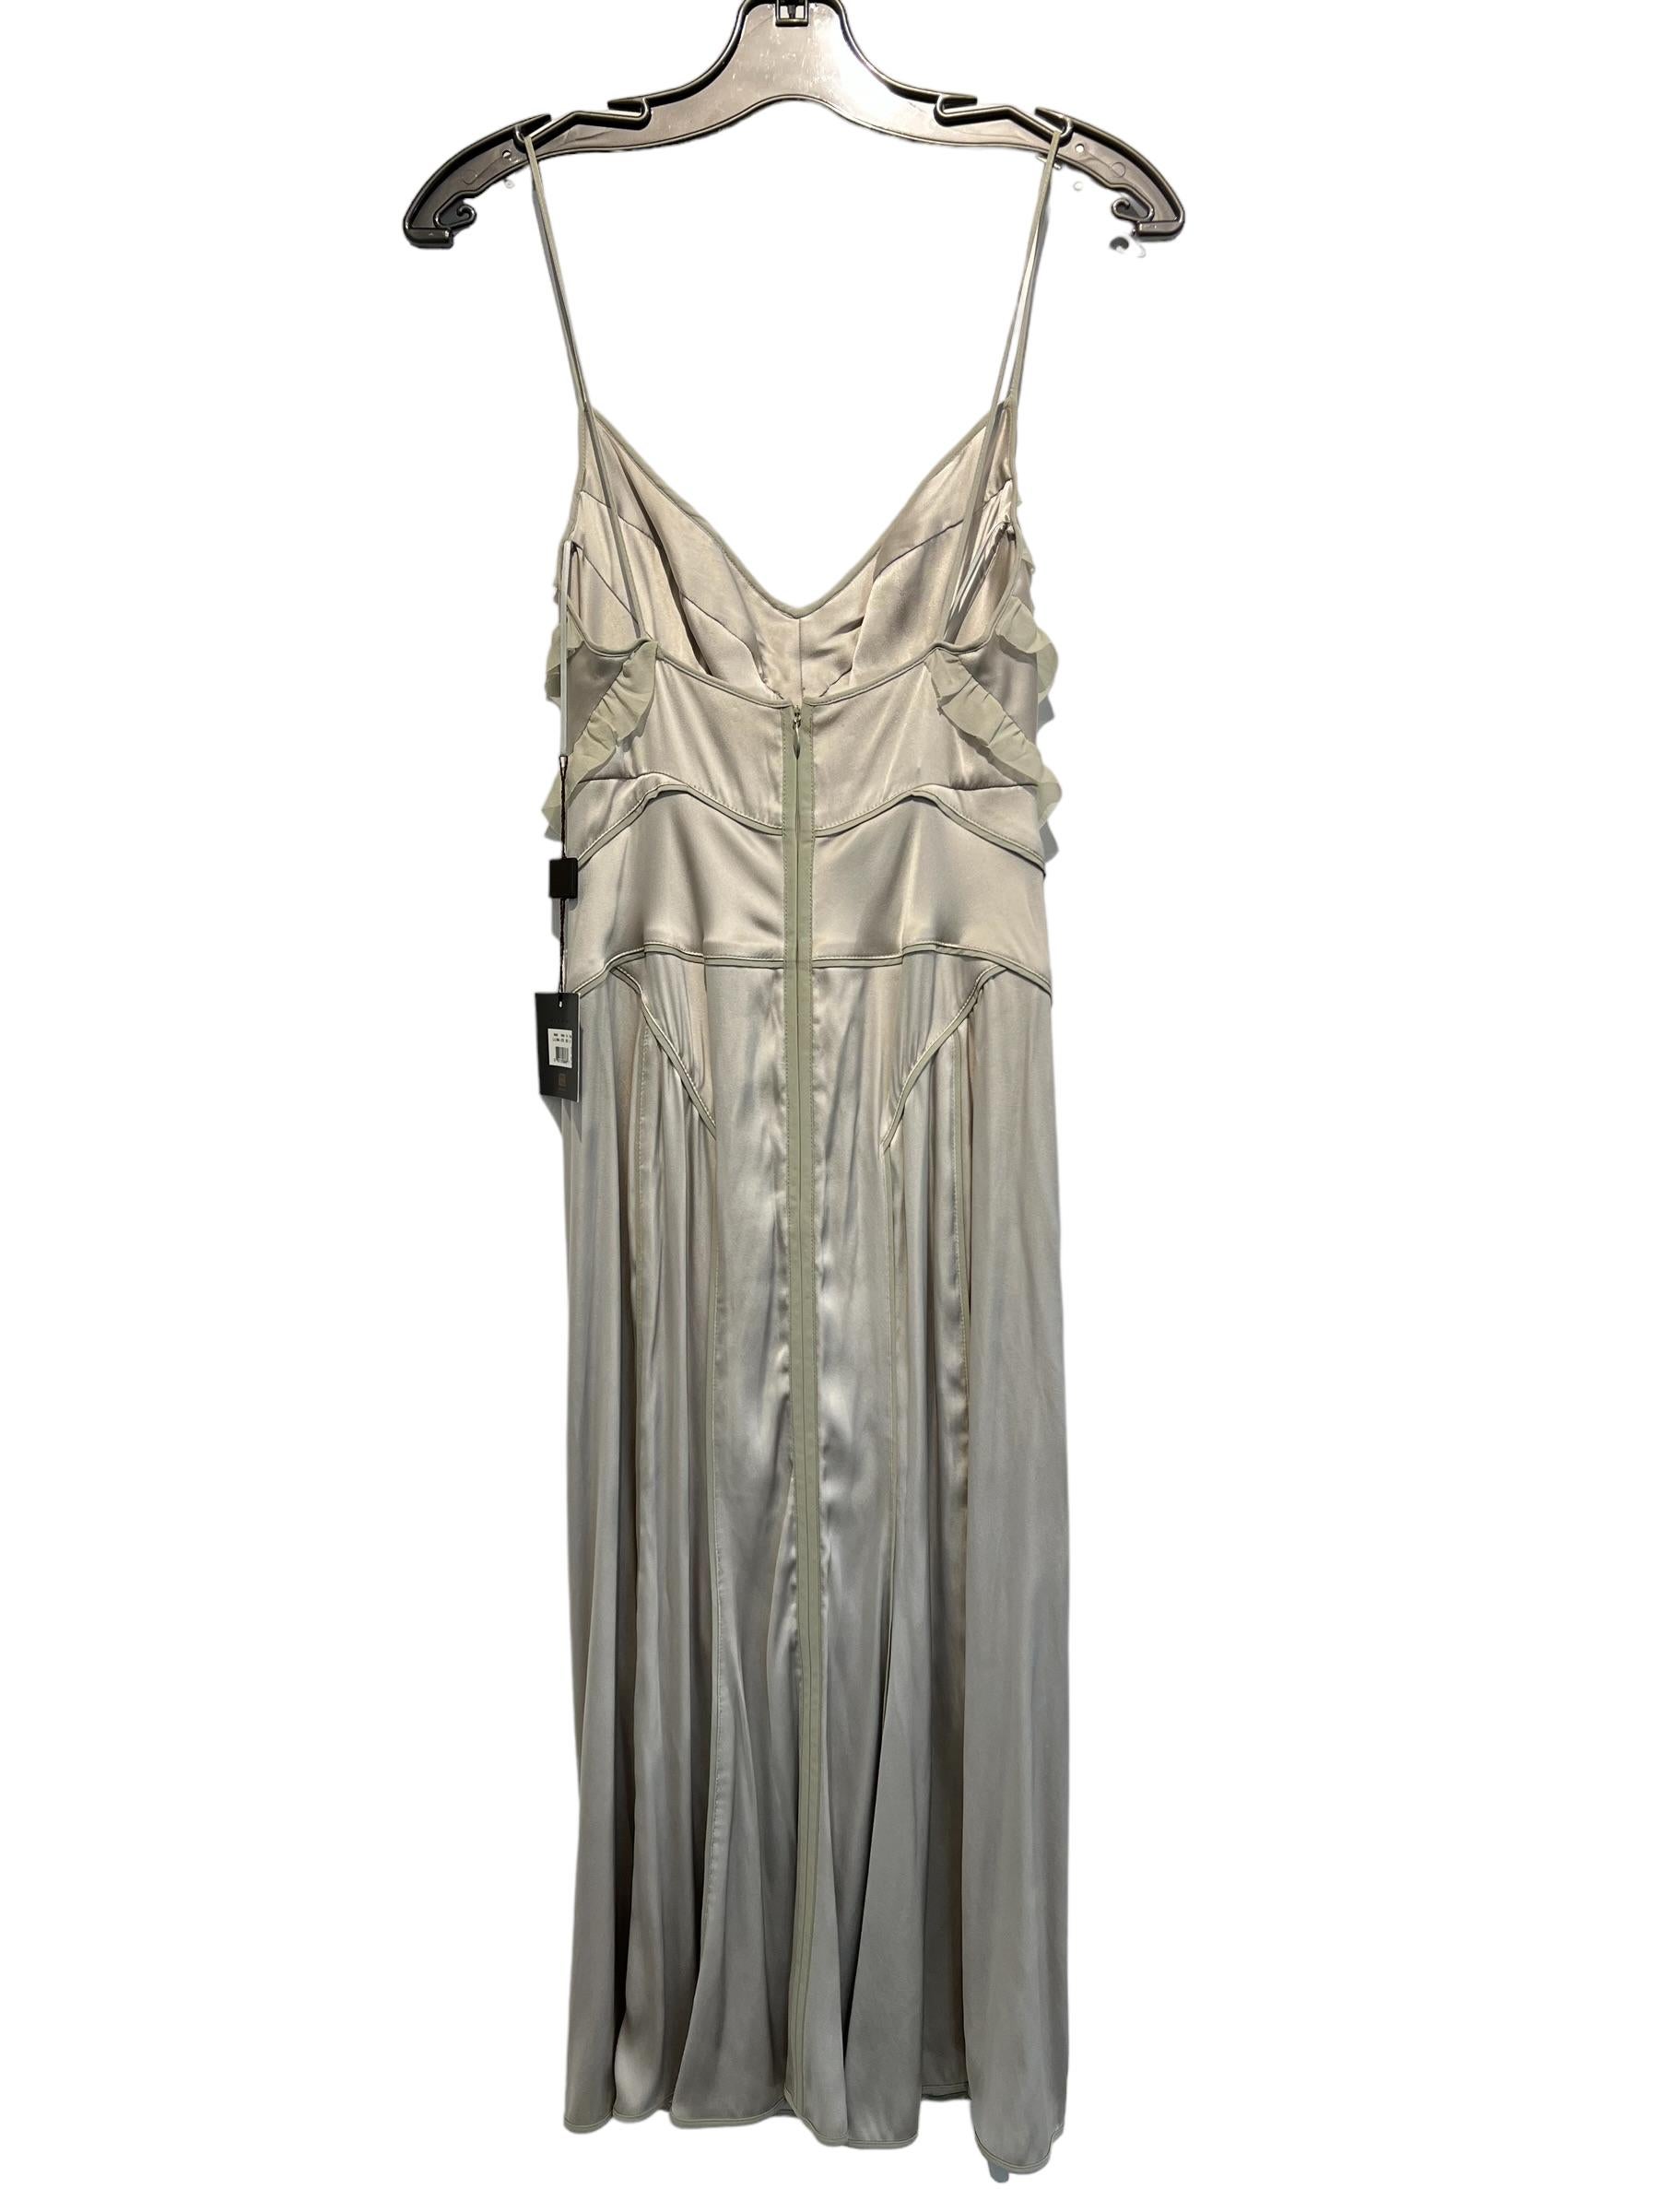 Classy Pleated Ruffle Gray Silk Dress from Narciso Rodriquez. Spaghetti Structure with V-Neck.